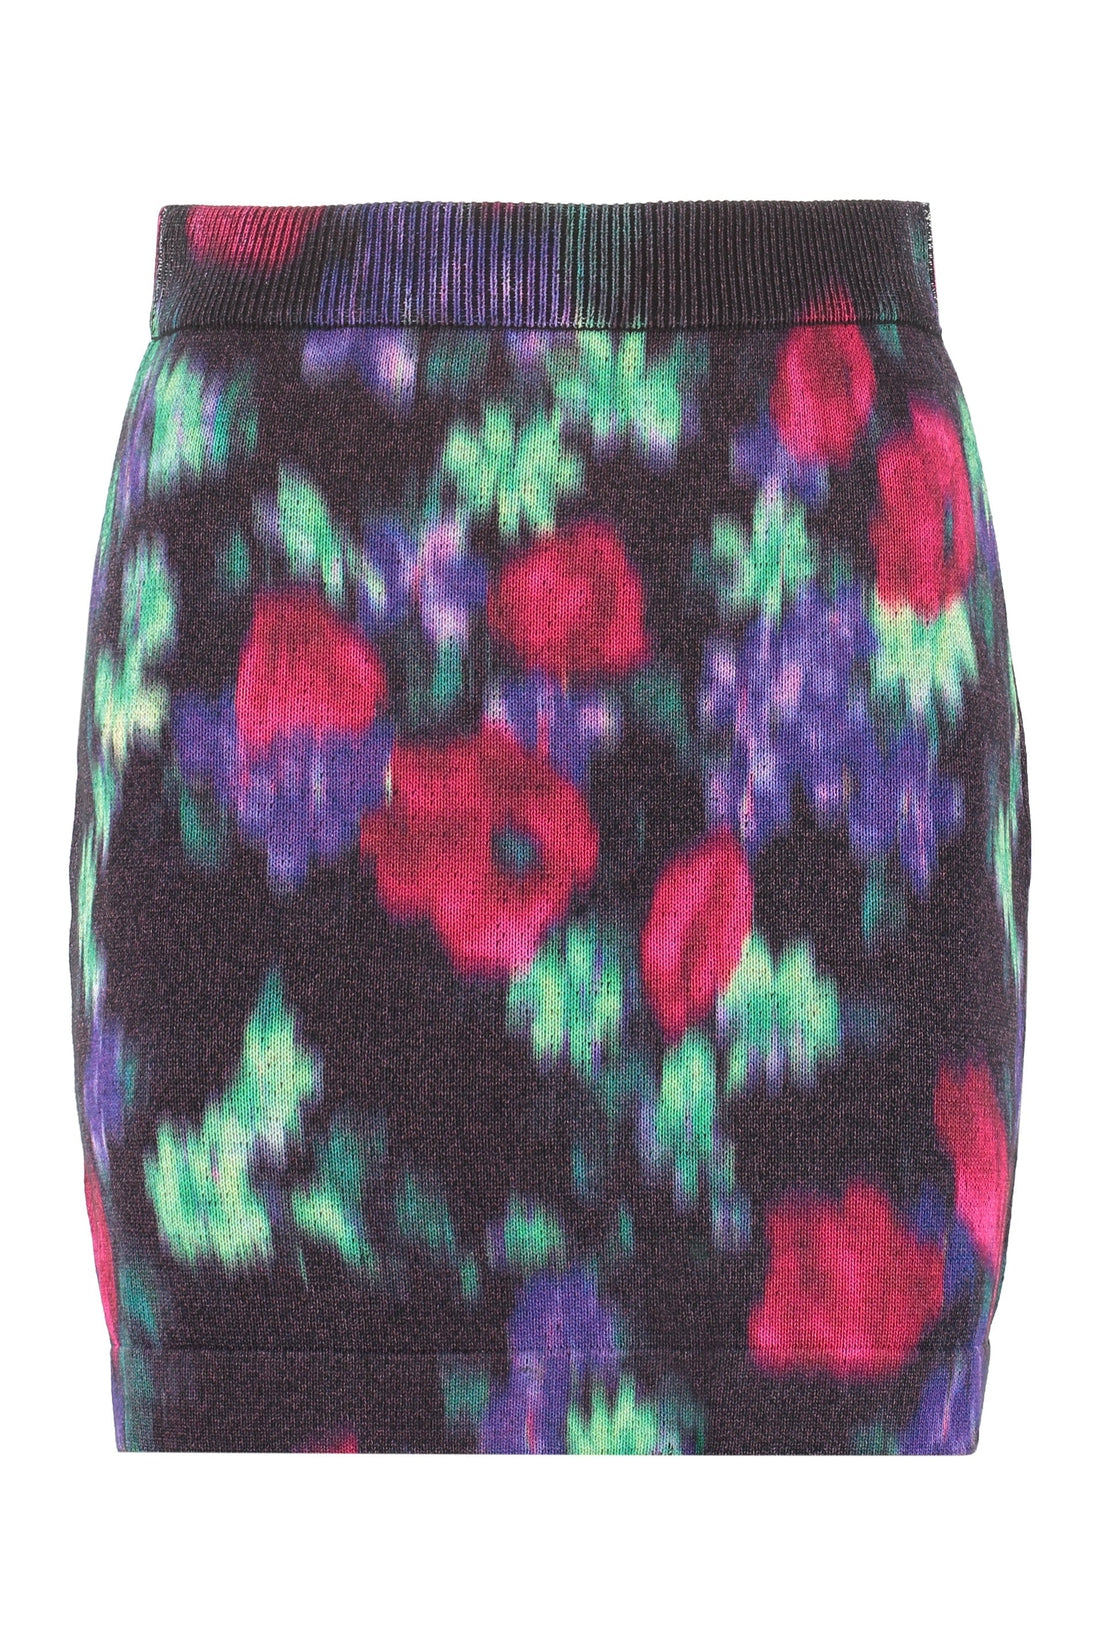 Kenzo-OUTLET-SALE-Knitted mini skirt-ARCHIVIST